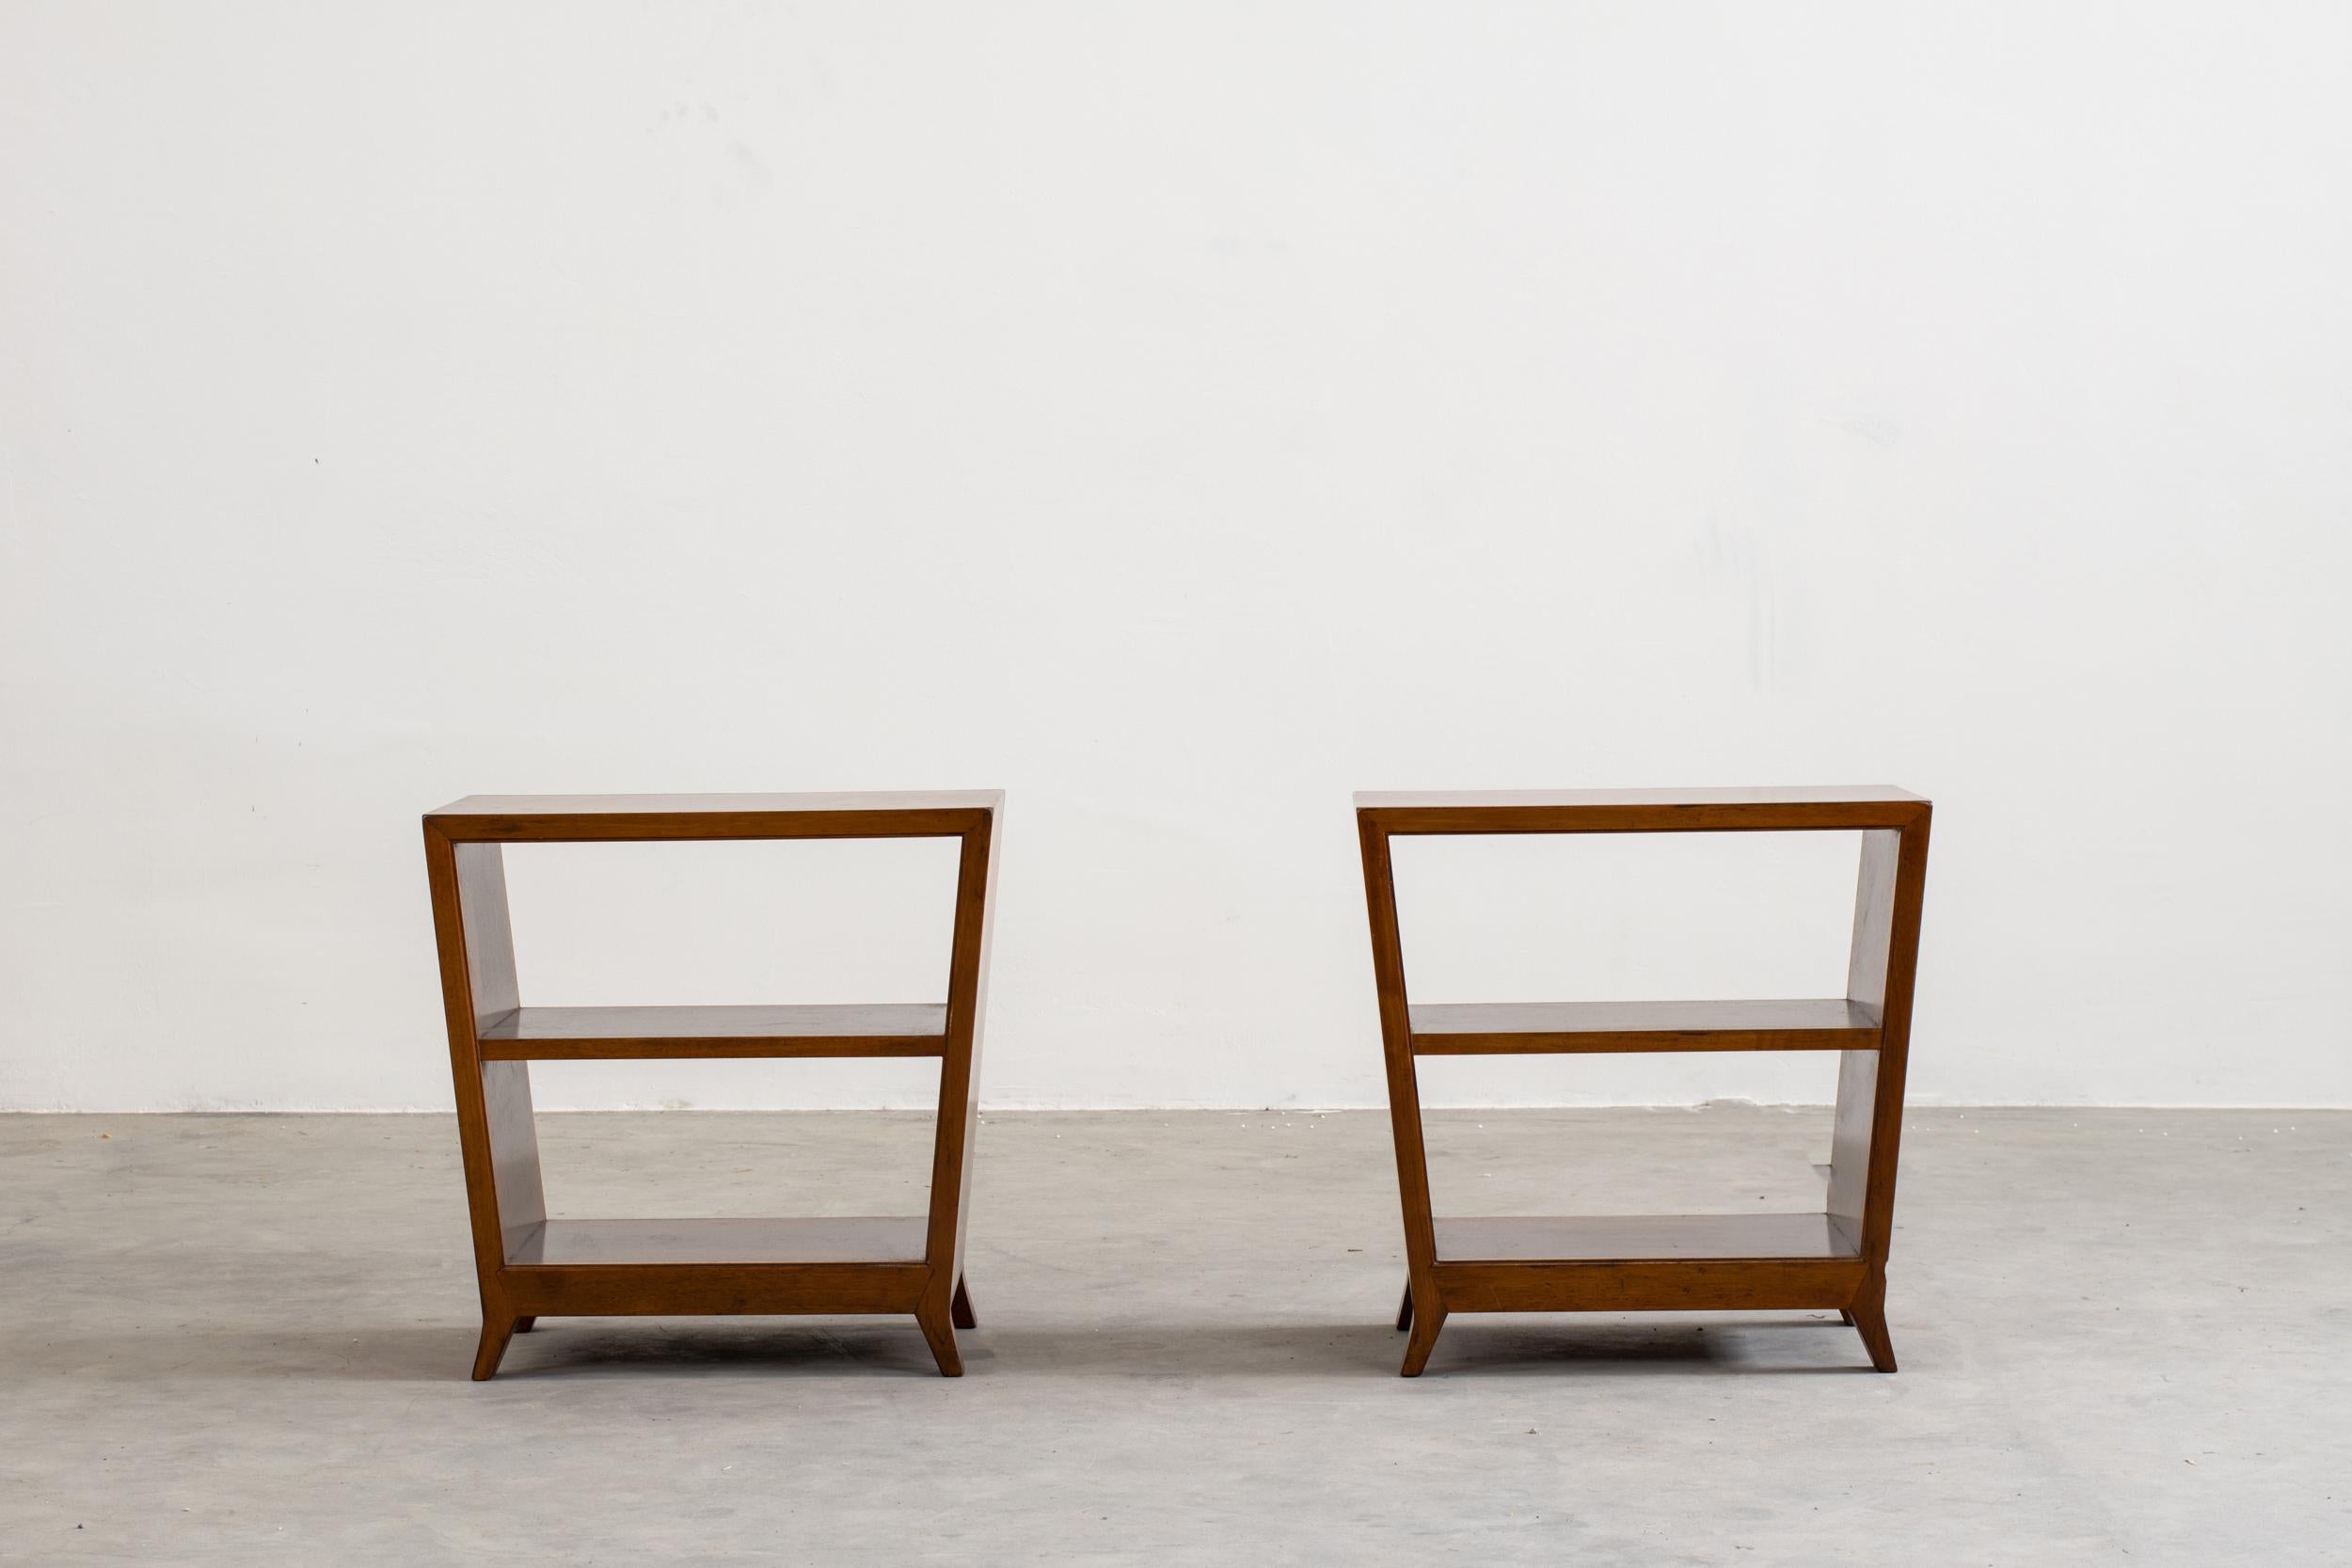 Set of two side tables with shelves or little bookcases in walnut wood, designed by Gio Ponti for Schirolli 1950s, Italy.
Dimensions: 50 x 50 x 30 cm (each).